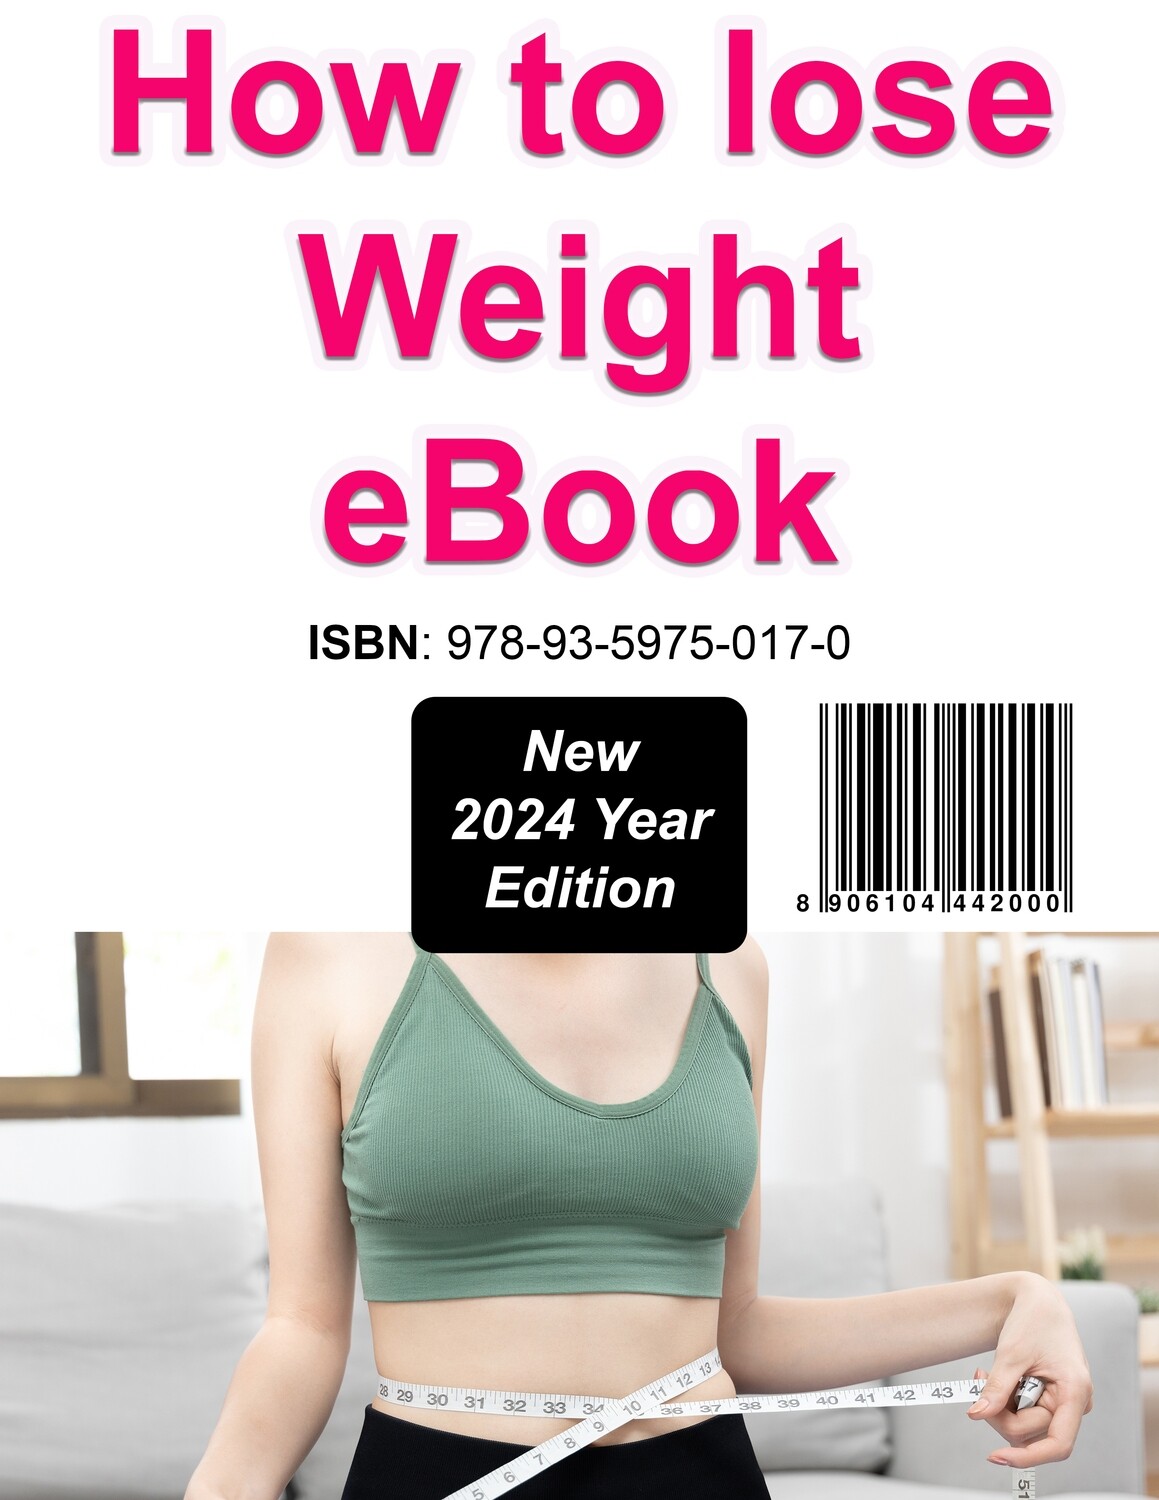 How to lose Weight eBook